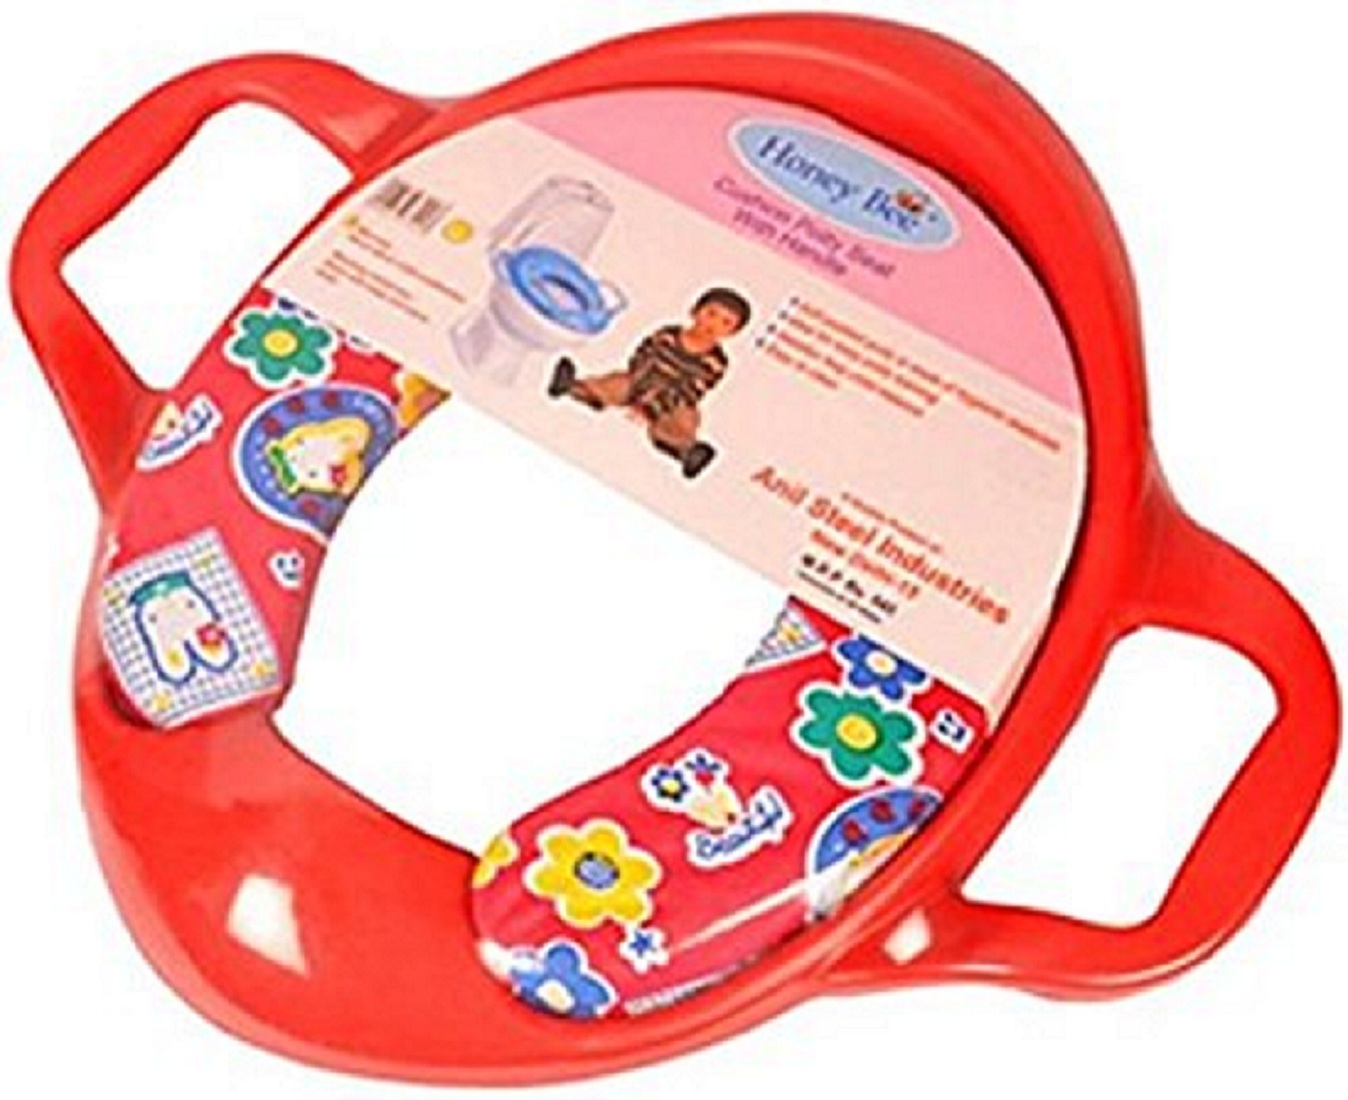 Buy Cushioned Baby Toilet Training Potty Seat With Handles (Red) Online